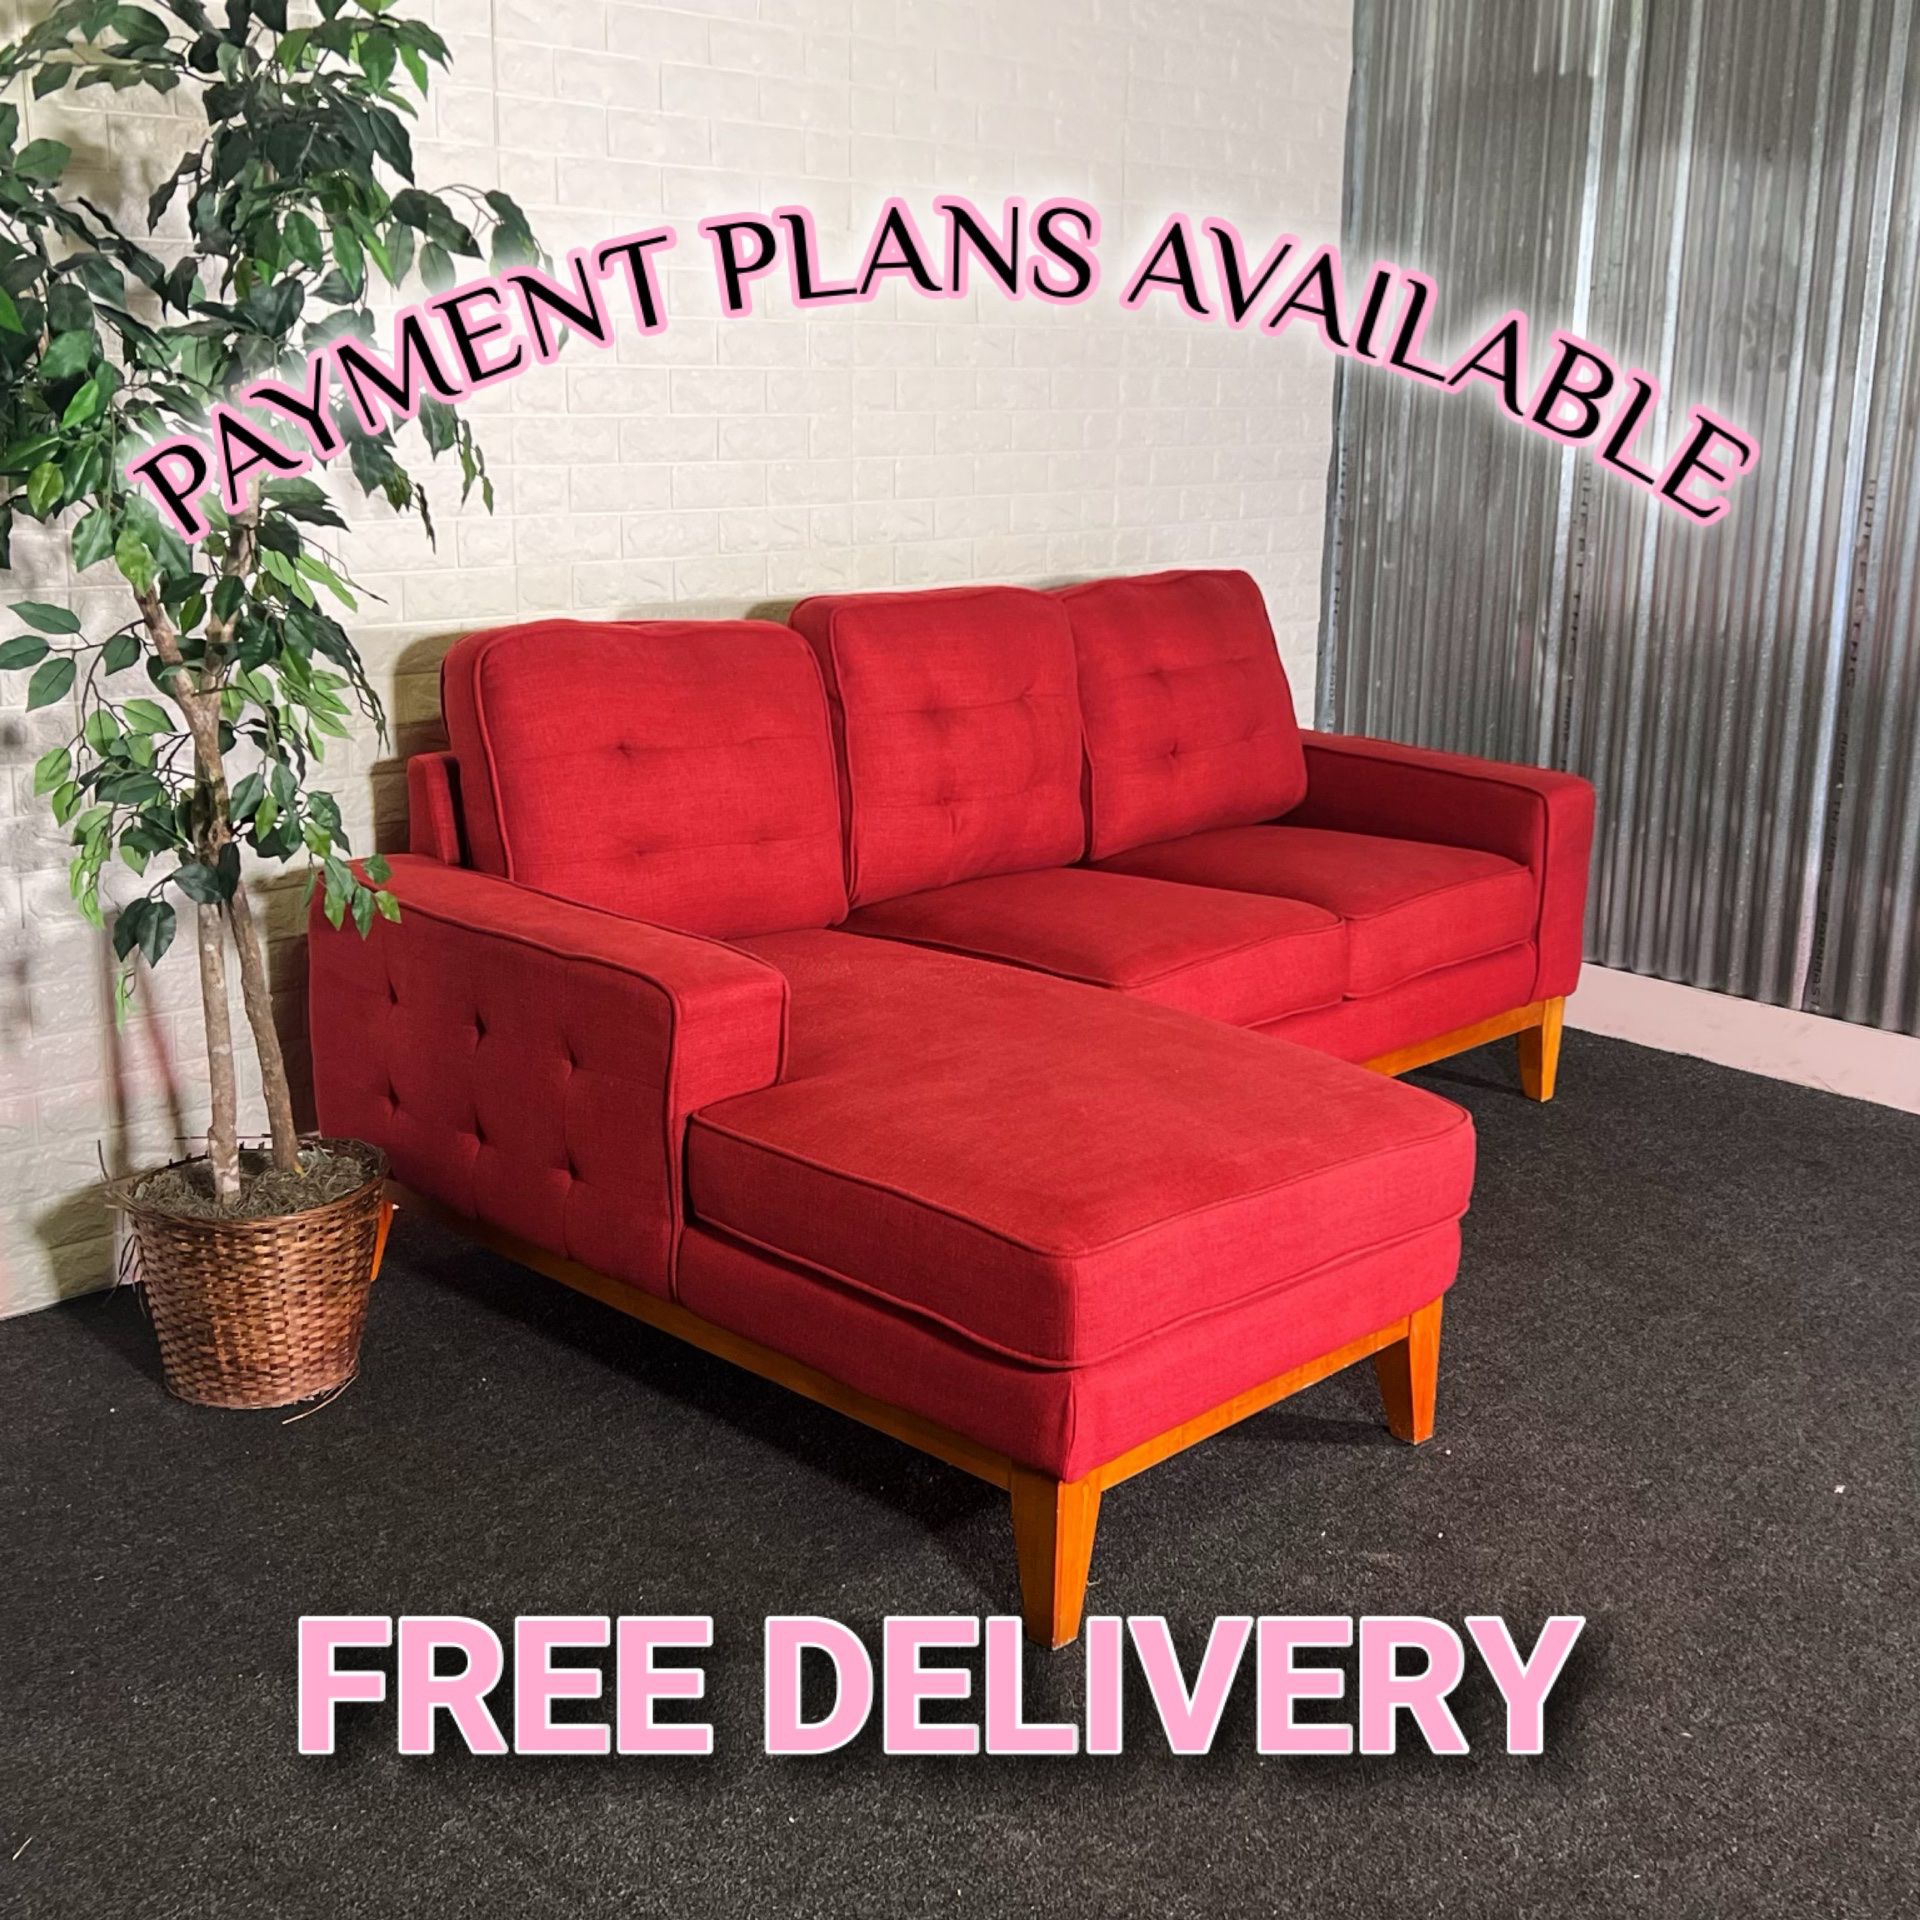 RED SECTIONAL SOFA COUCH SALA